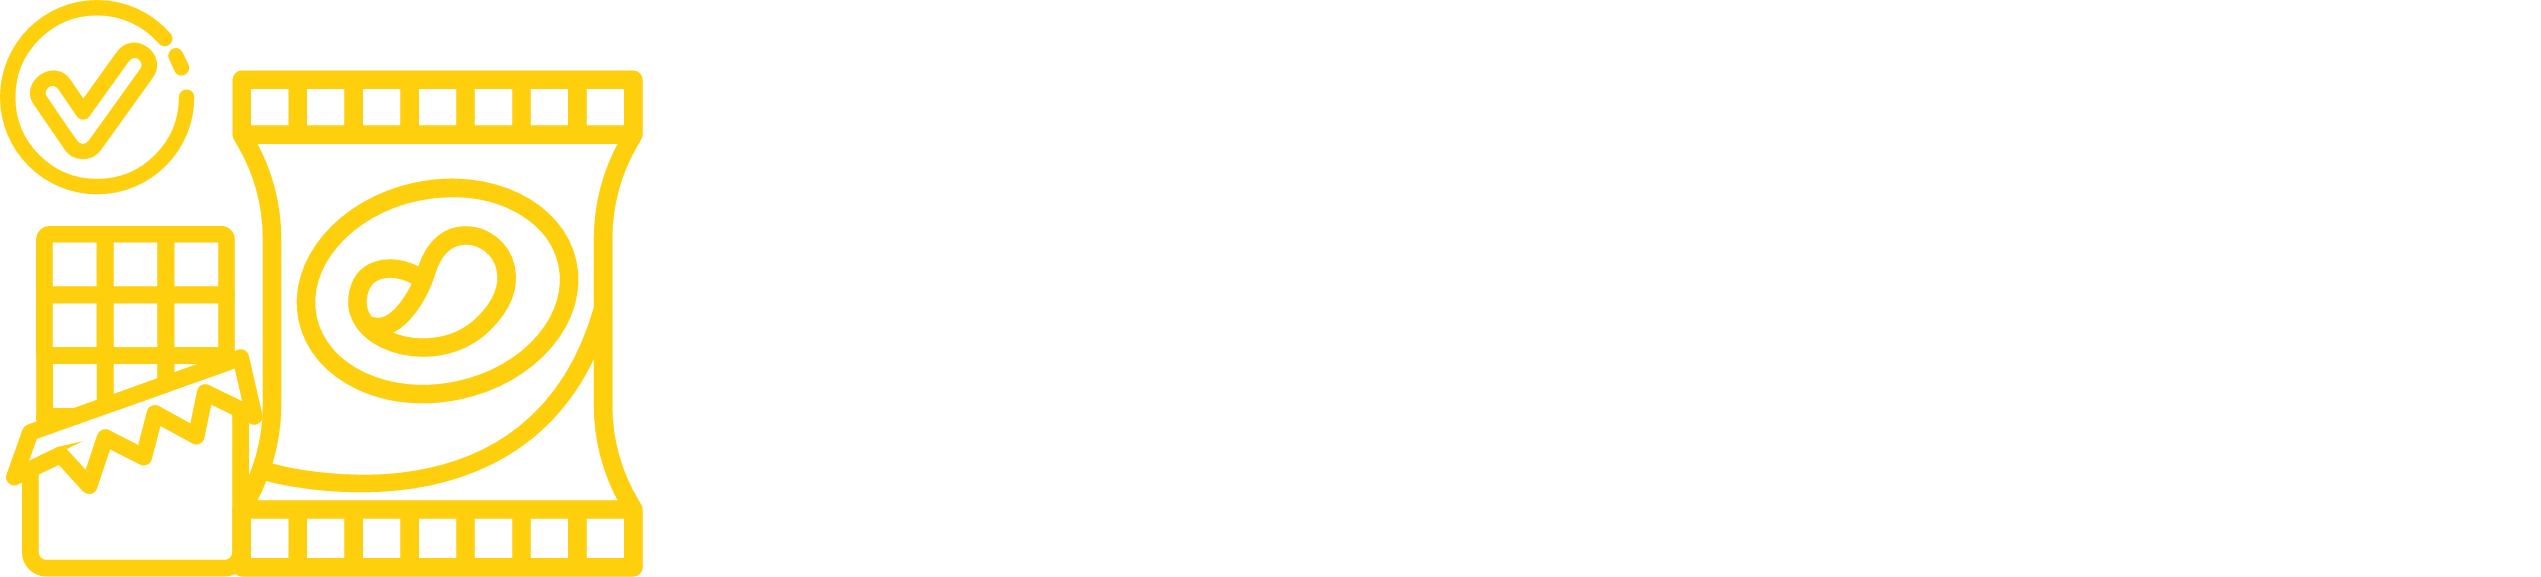 CAUSIA_FoodSafety